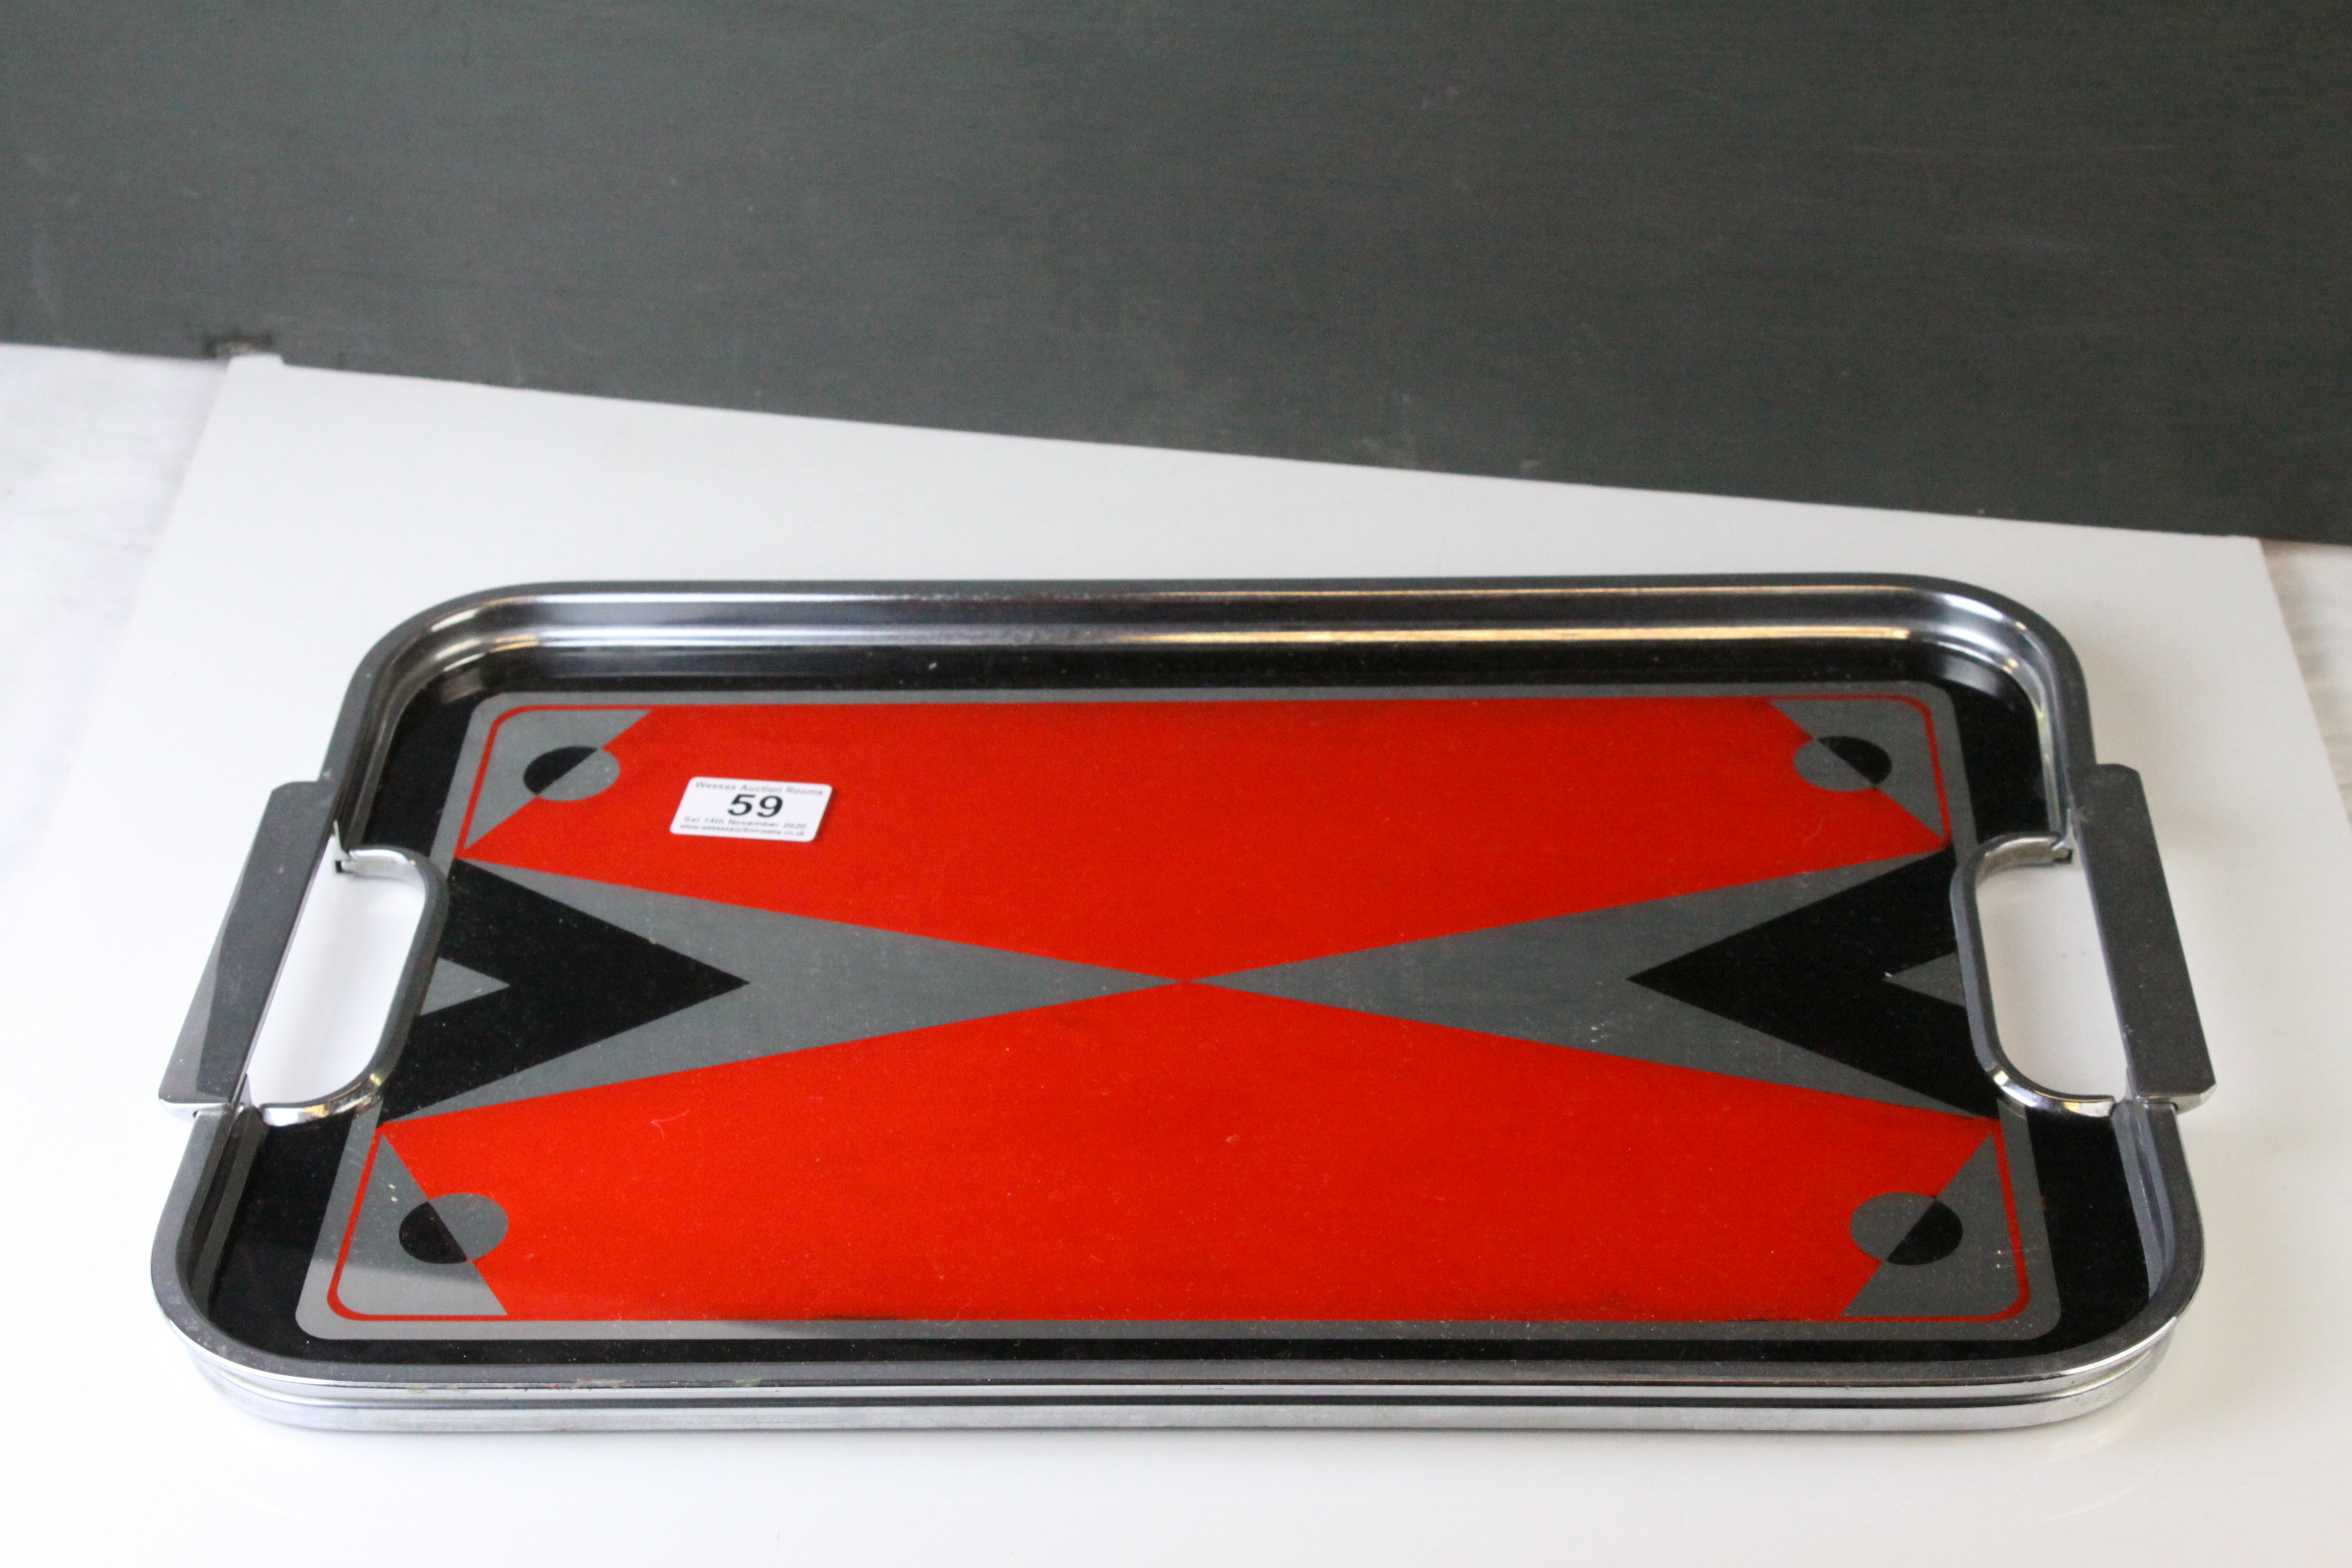 Art Deco Chrome Serving Tray, the glass mirrored panel with a red and black geometric design,